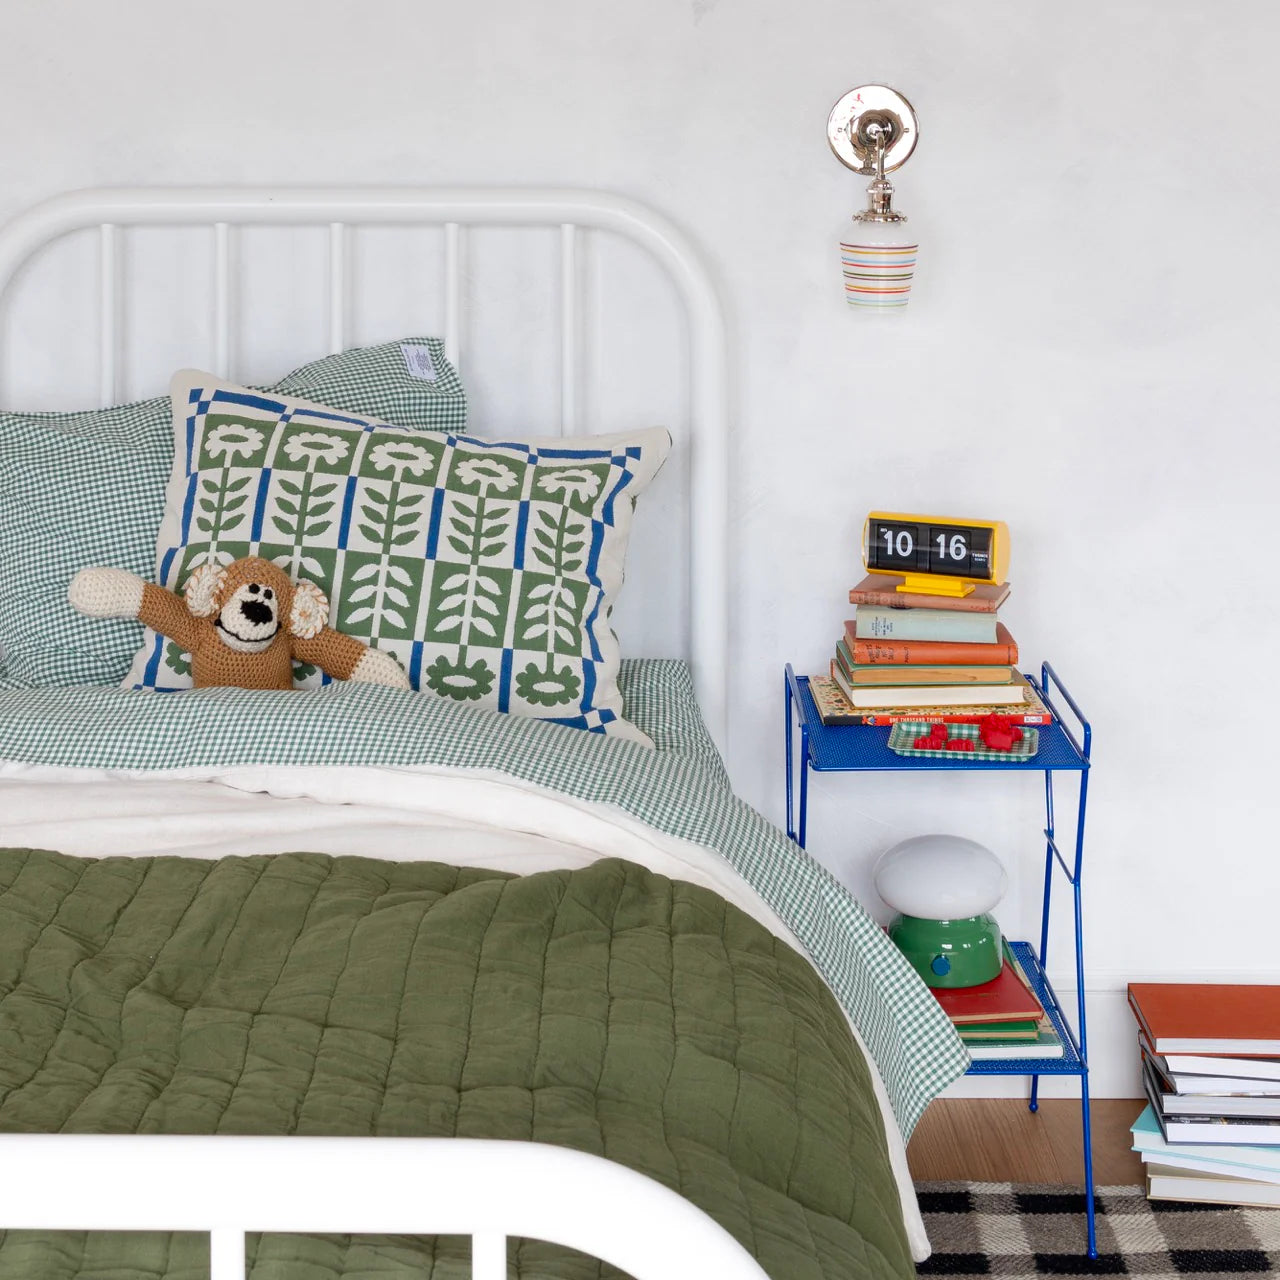 Holiday kid's room with table lamp on side table.